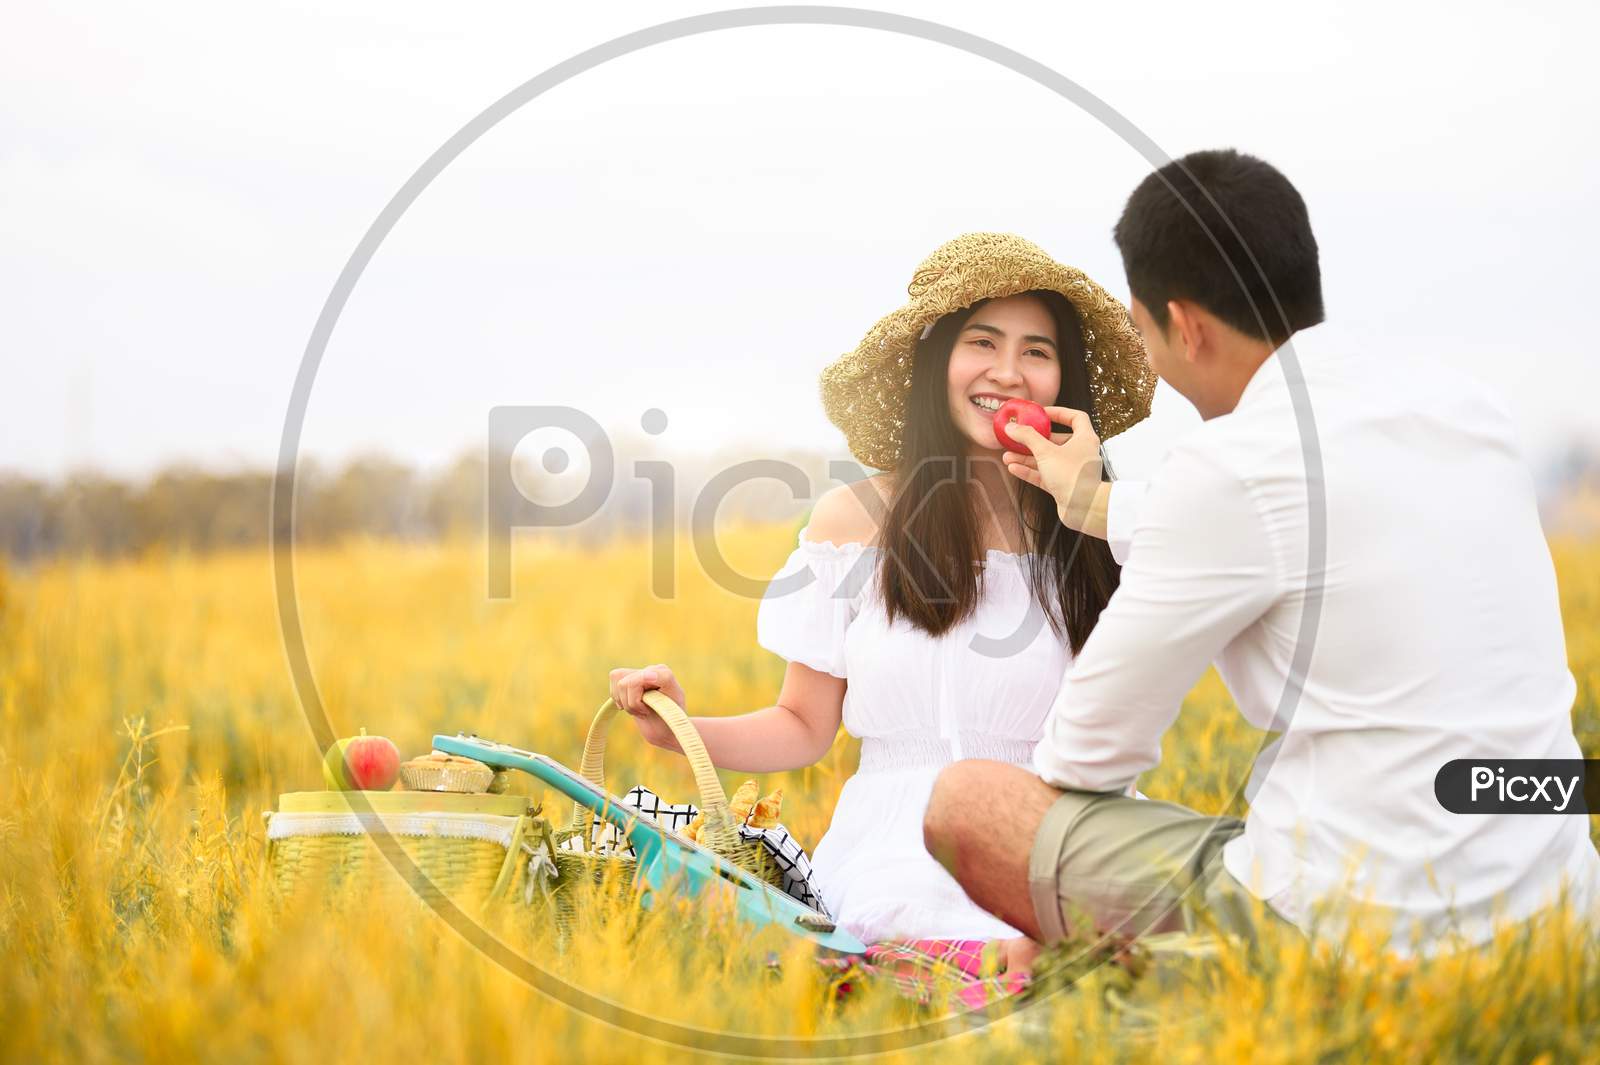 Asian Couple Doing Picnic In Golden Autumn Meadow Grass Field As Honeymoon Trip After Wedding. Valentines Day And Family Love Concept. Outdoors Nature And Long Vacation Relaxation. People Lifestyes